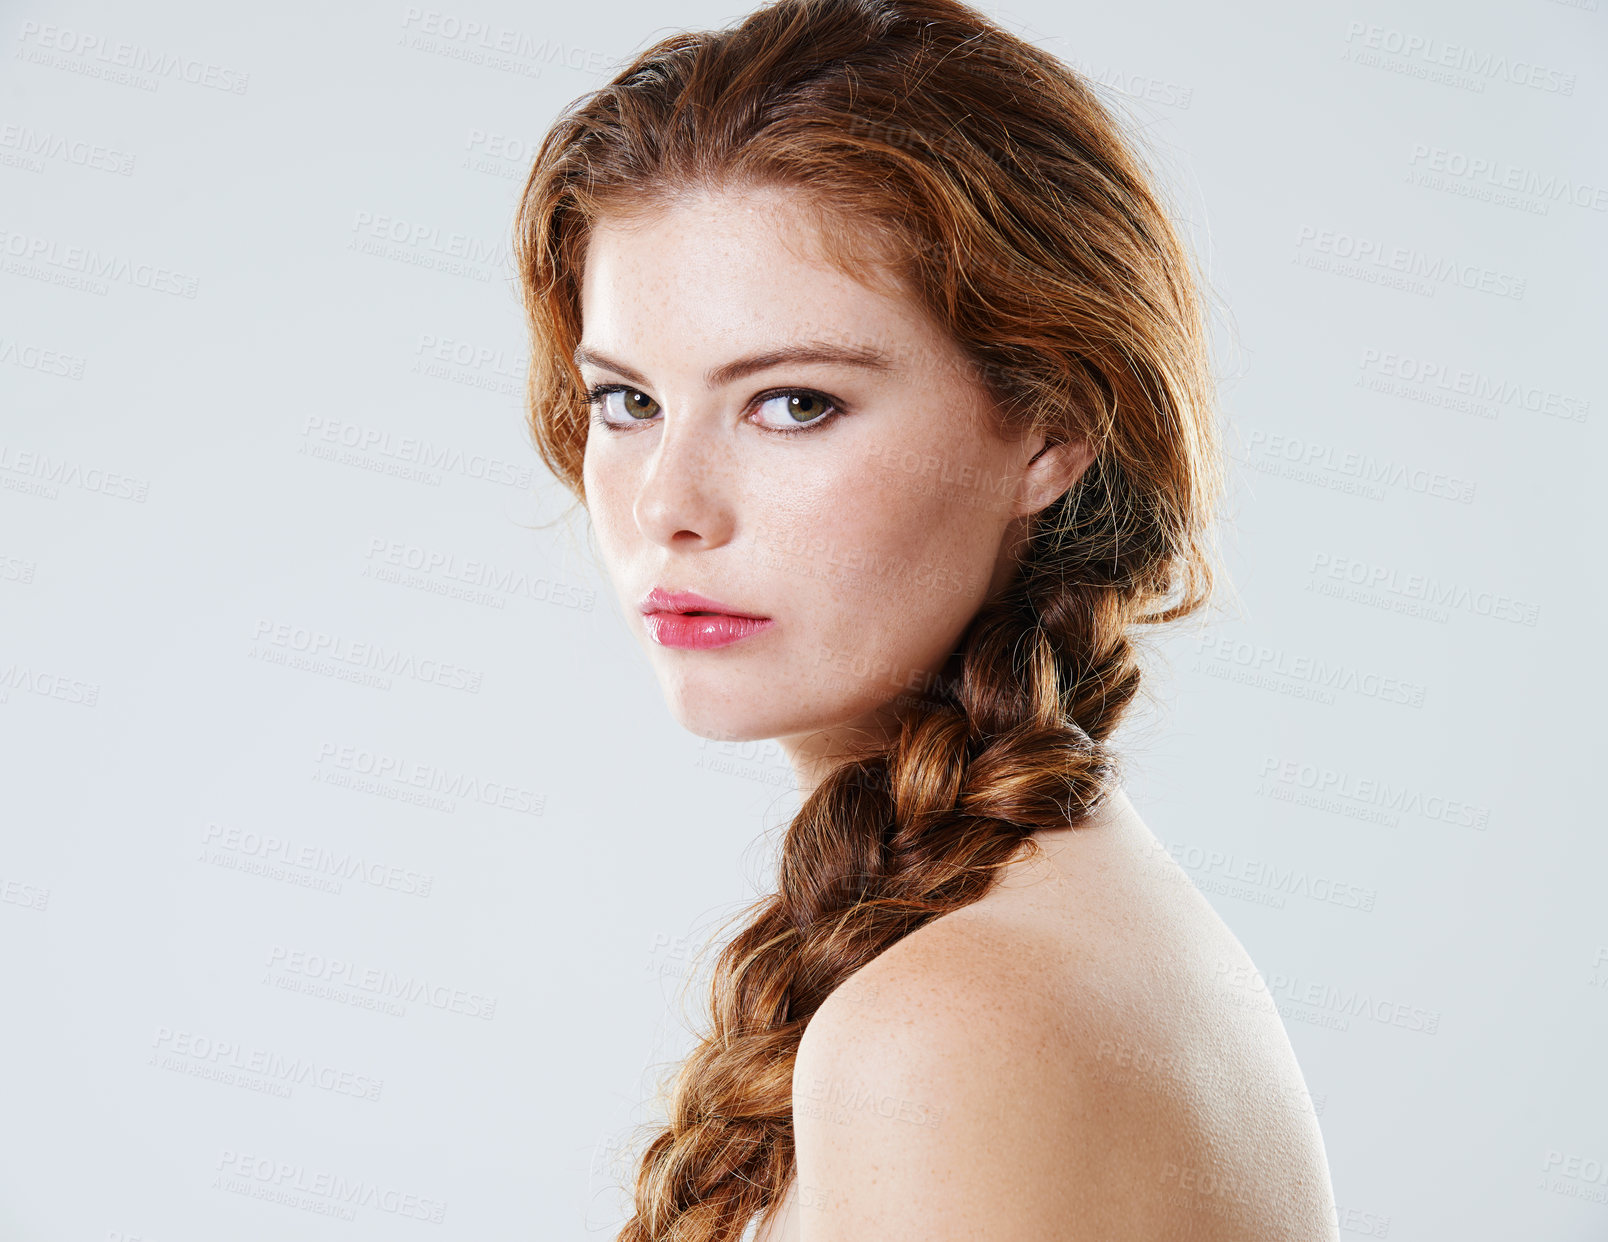 Buy stock photo Studio portrait of a beautiful young woman with braided hair looking over her bare shoulder